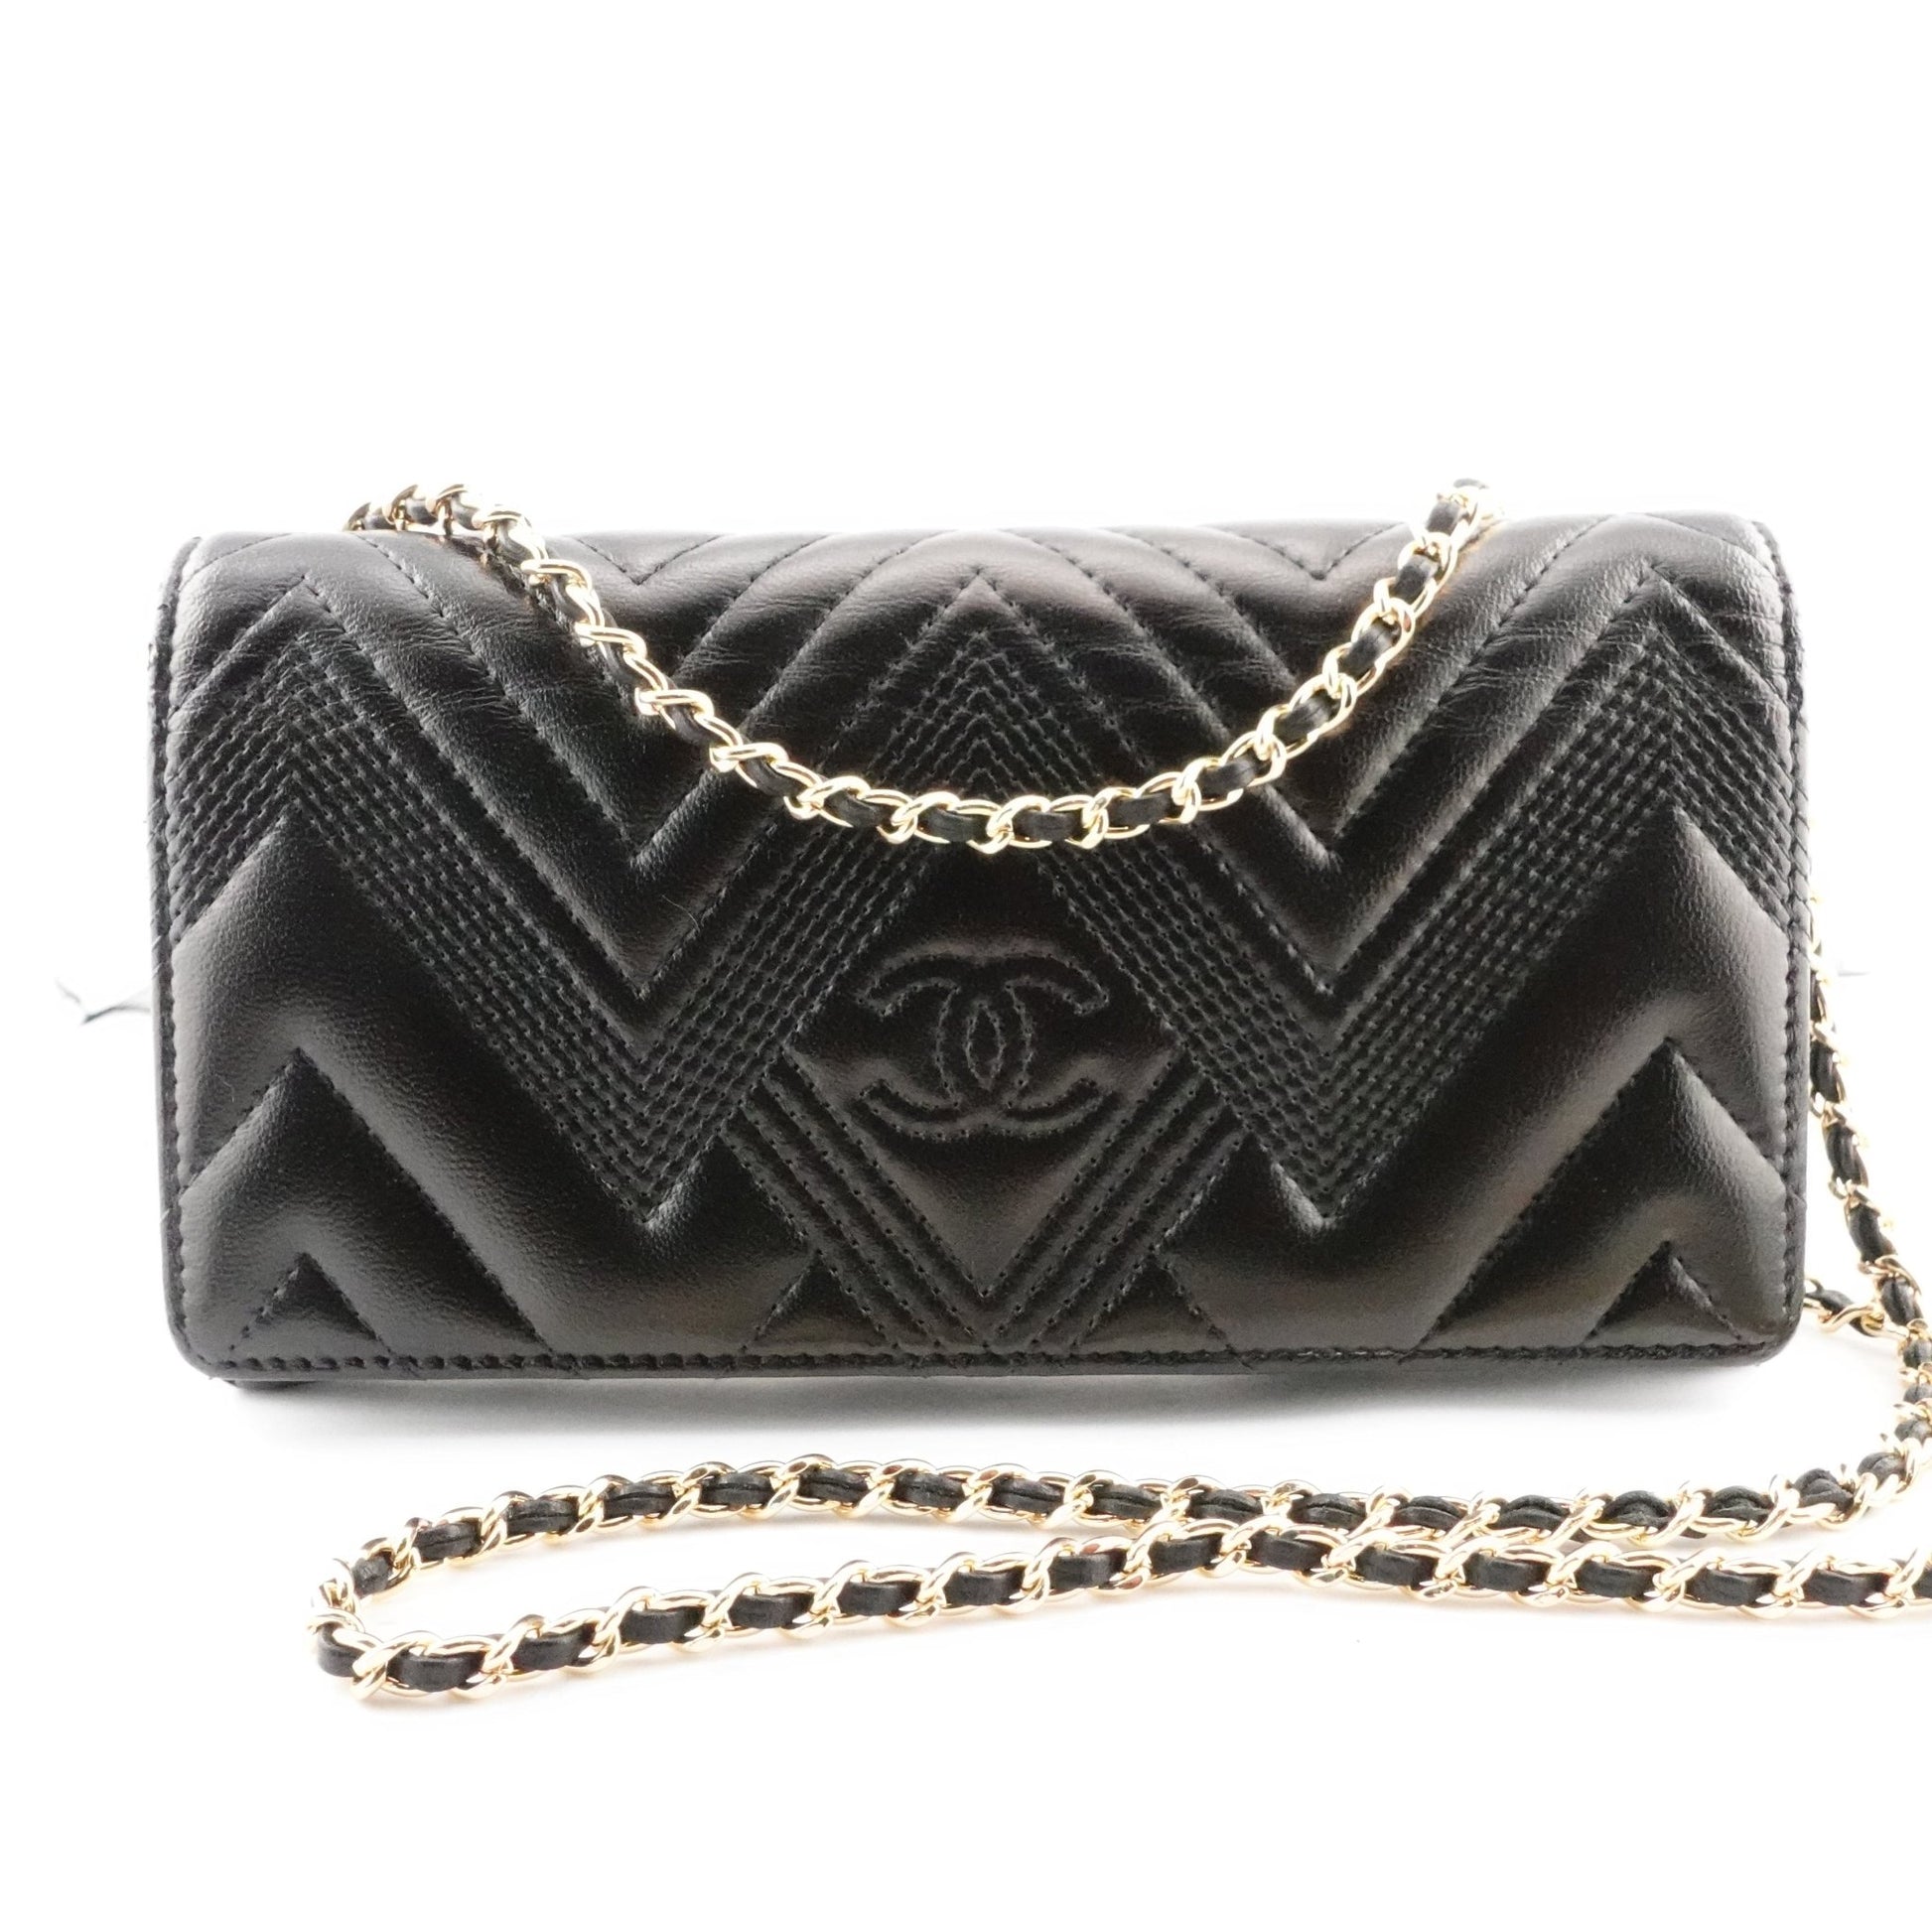 CHANEL Lambskin Chevron Quilted Full Flap Wallet on Chain - Bag Envy